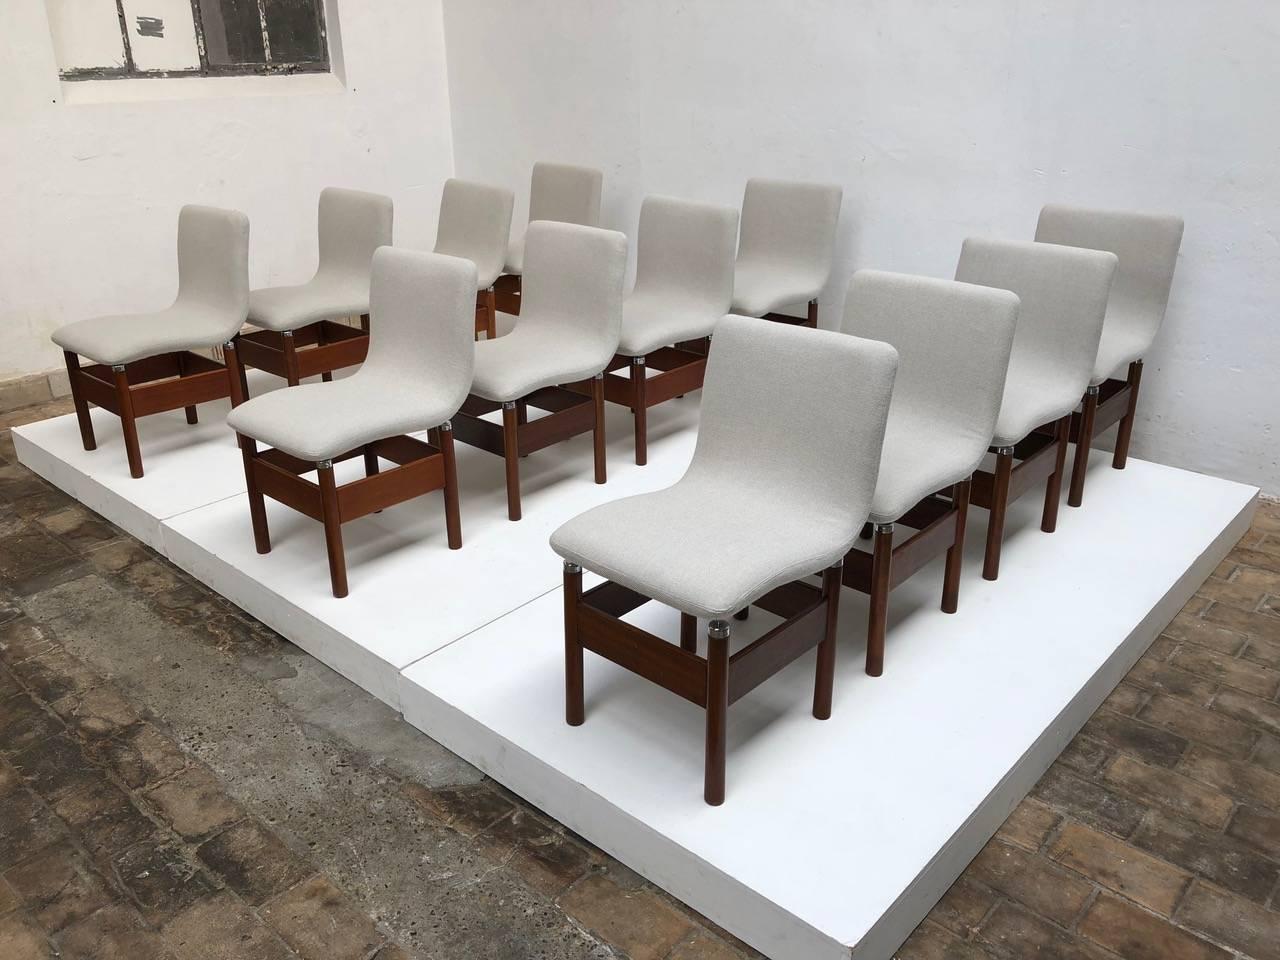 Wool 12 'Chelsea' Dining Chairs by Introini, Saporiti 1966, Upholstery Fully Restored For Sale